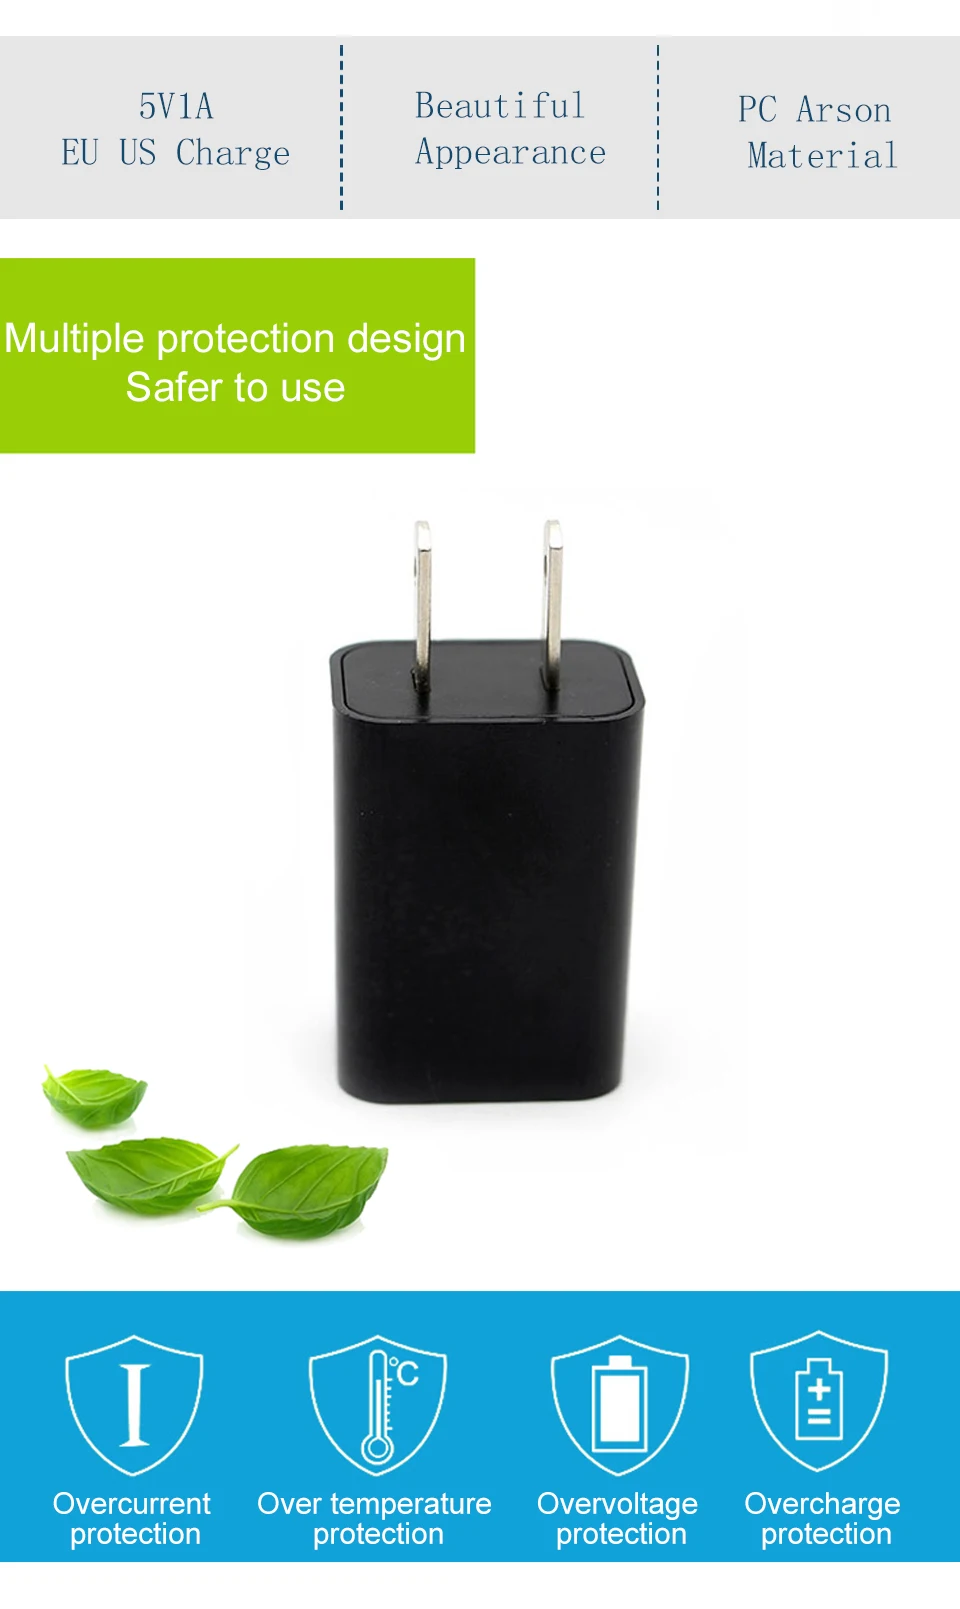 Mobile Phone Charger 5V1A USB Travel Charger Portable Wall Adapter EU US Plug BlackWhite For iPhone iPad Samsung Xiaomi Phone (2)